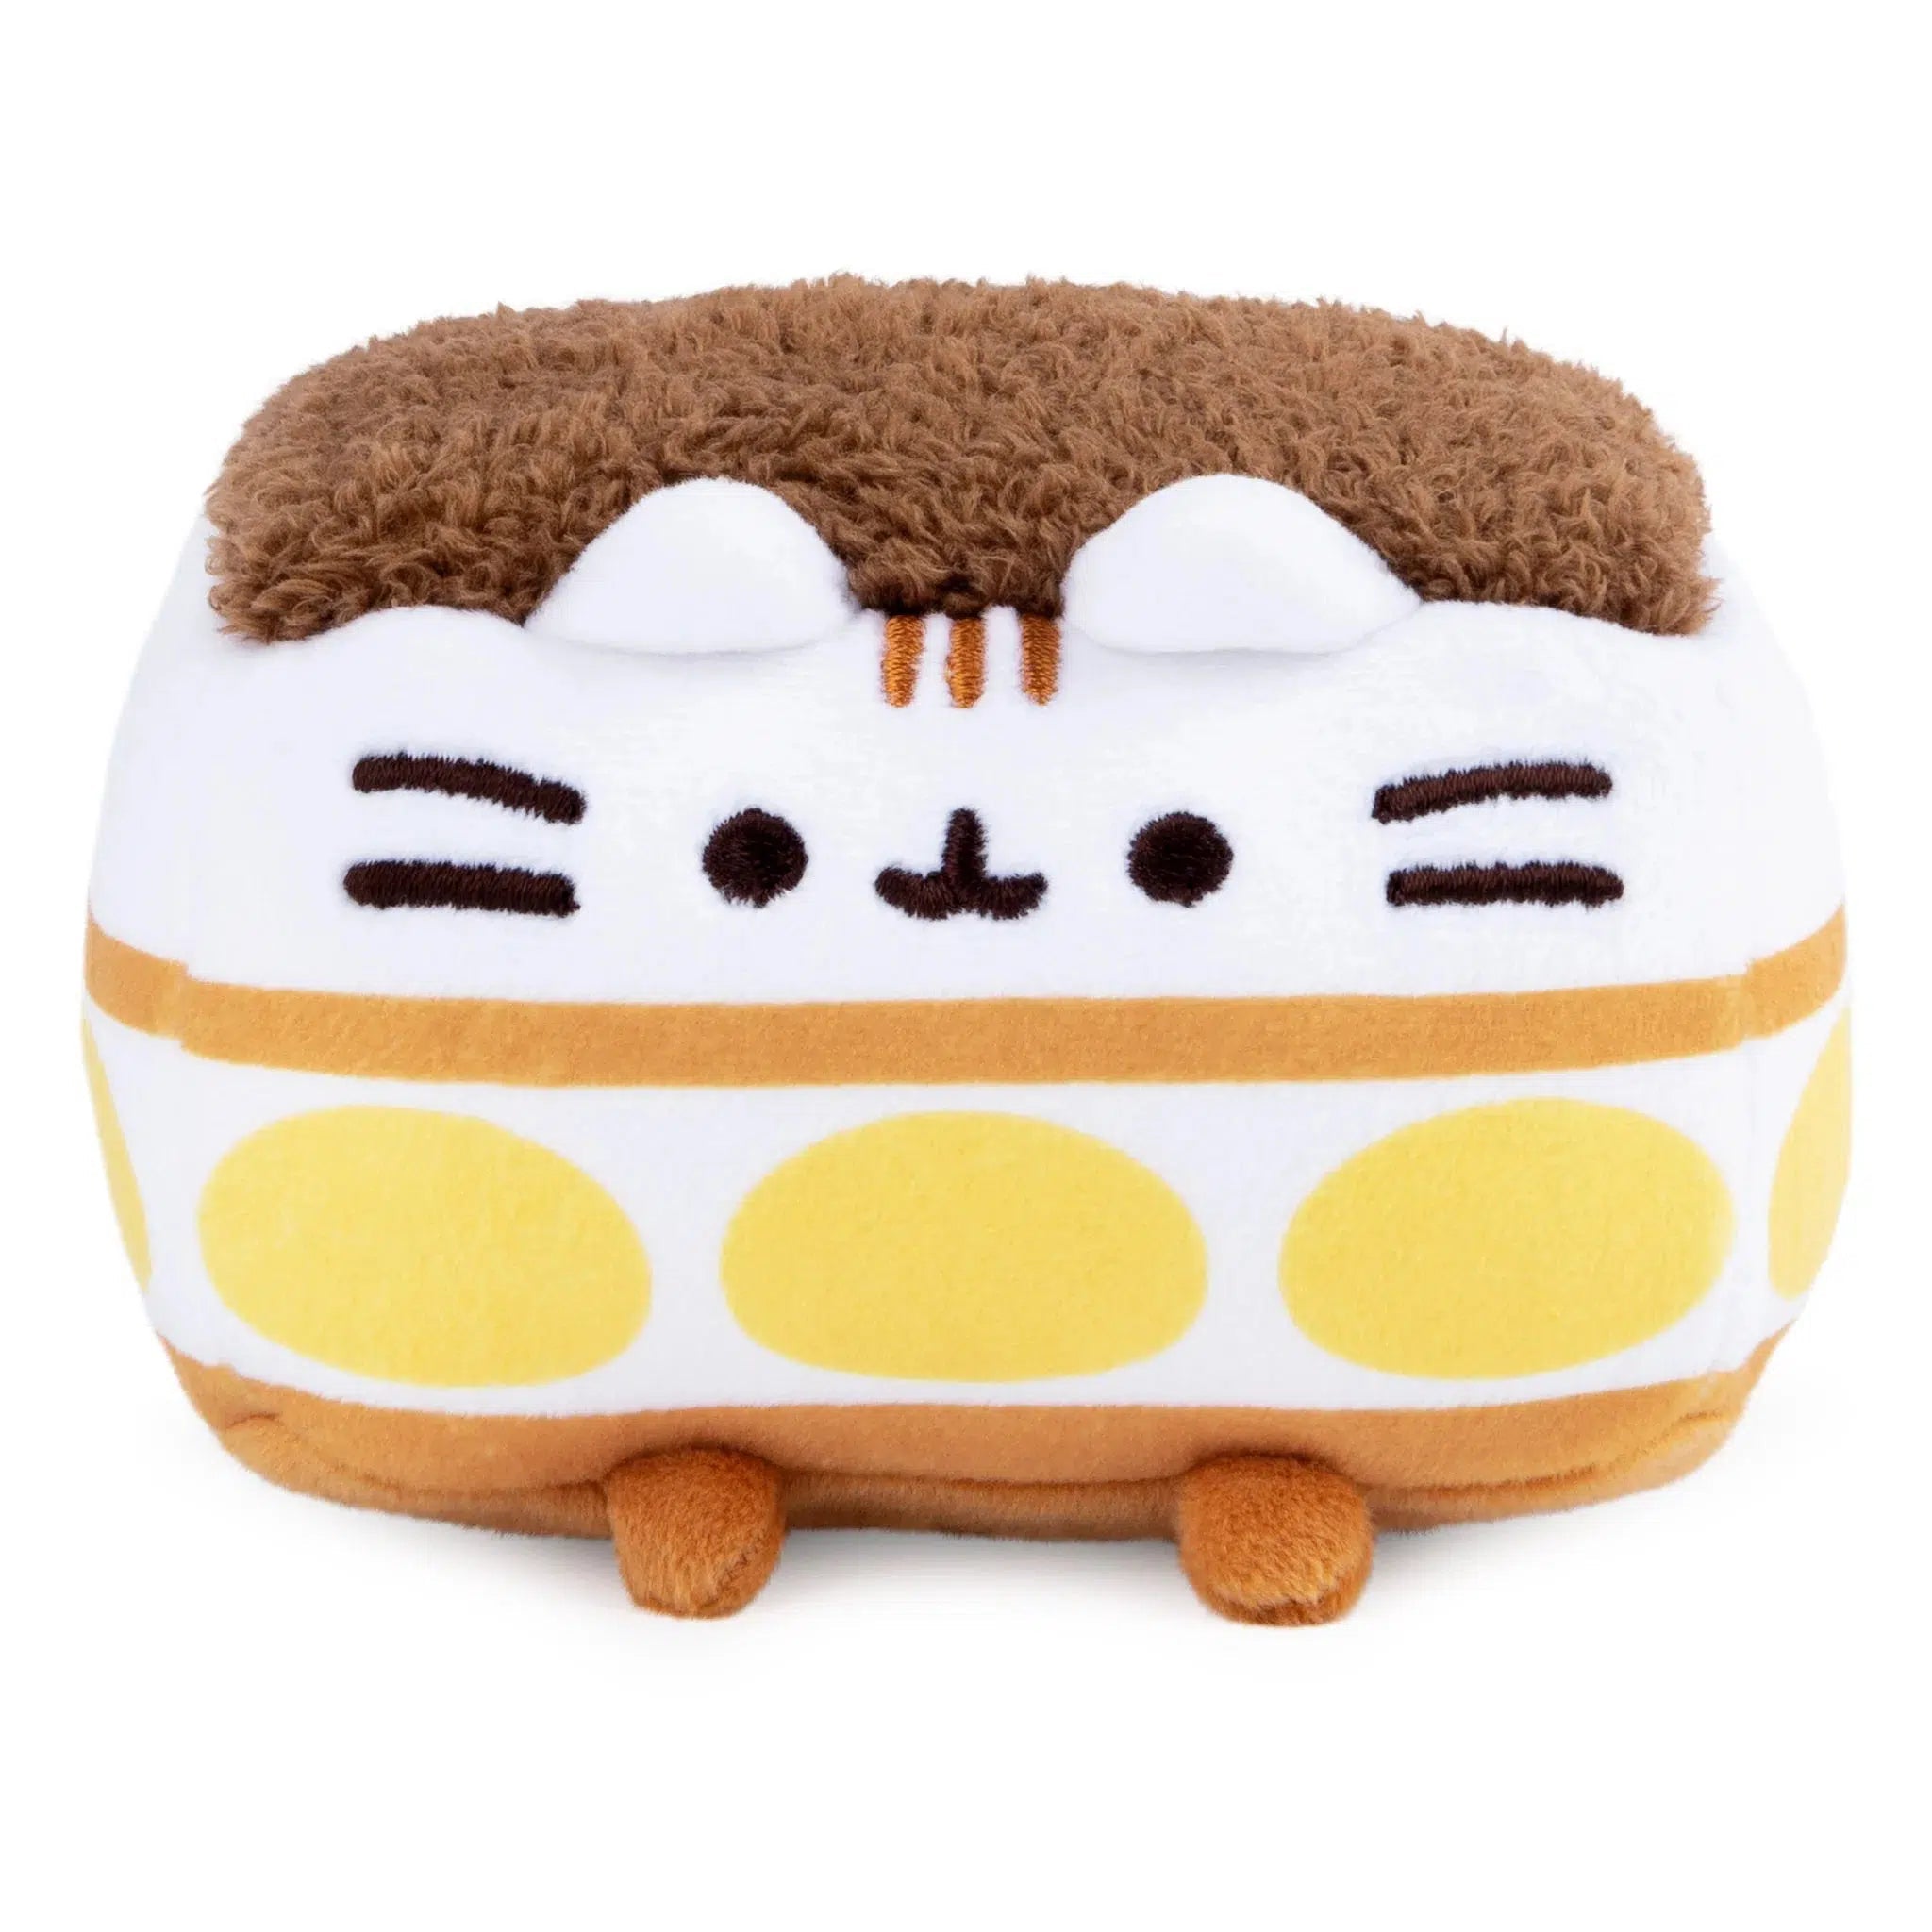 Pusheen : Treat Your Cat to a Surprise with Cat Kit, by Pusheen Box!